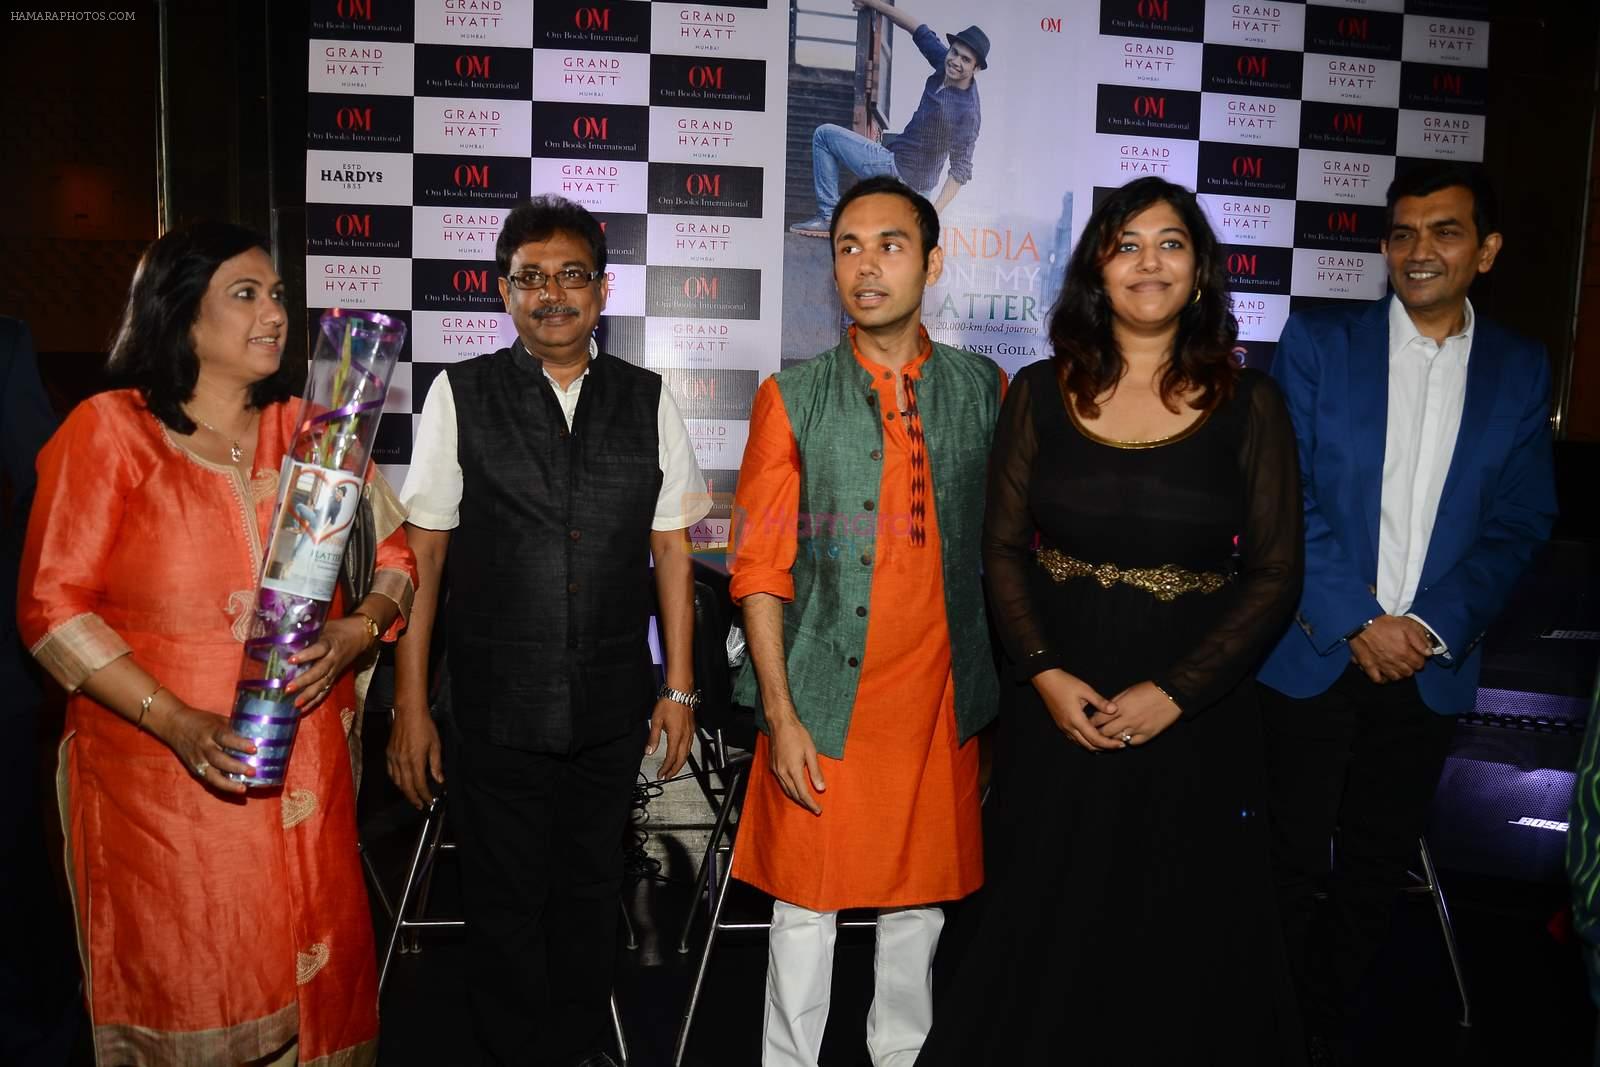 Sanjeev Kapoor at the launch of Saransh Goila's book India on my Platter in China House, Grand Hyatt on 1st July 2015